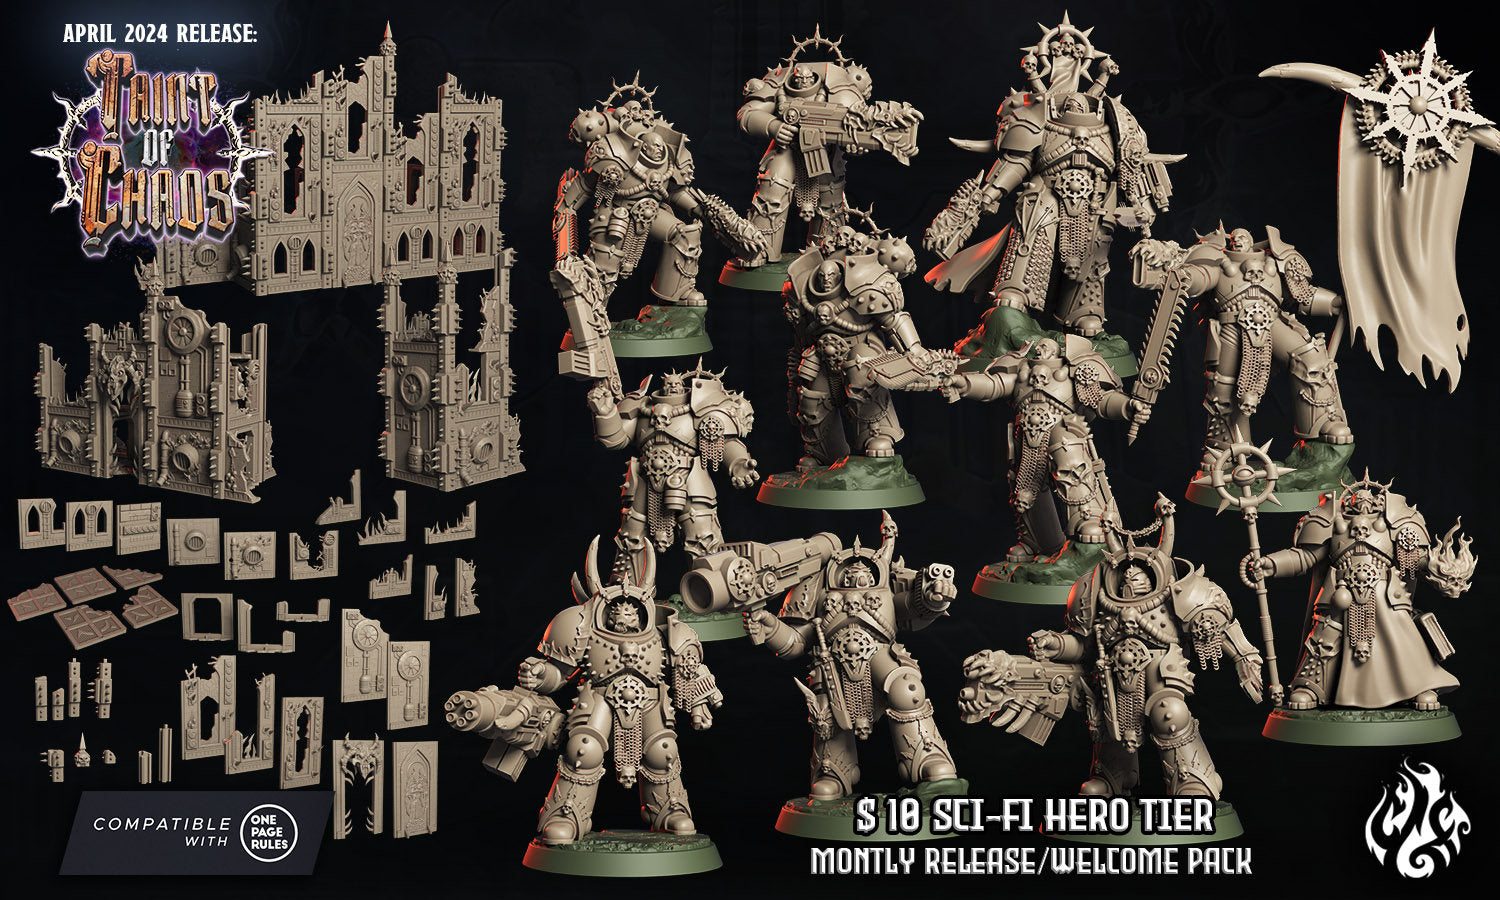 Black Guard Captain, Chaos Commander - Crippled God Foundry - Taint of Chaos | 32mm | Scifi | Power Armor | Soldier | Lord